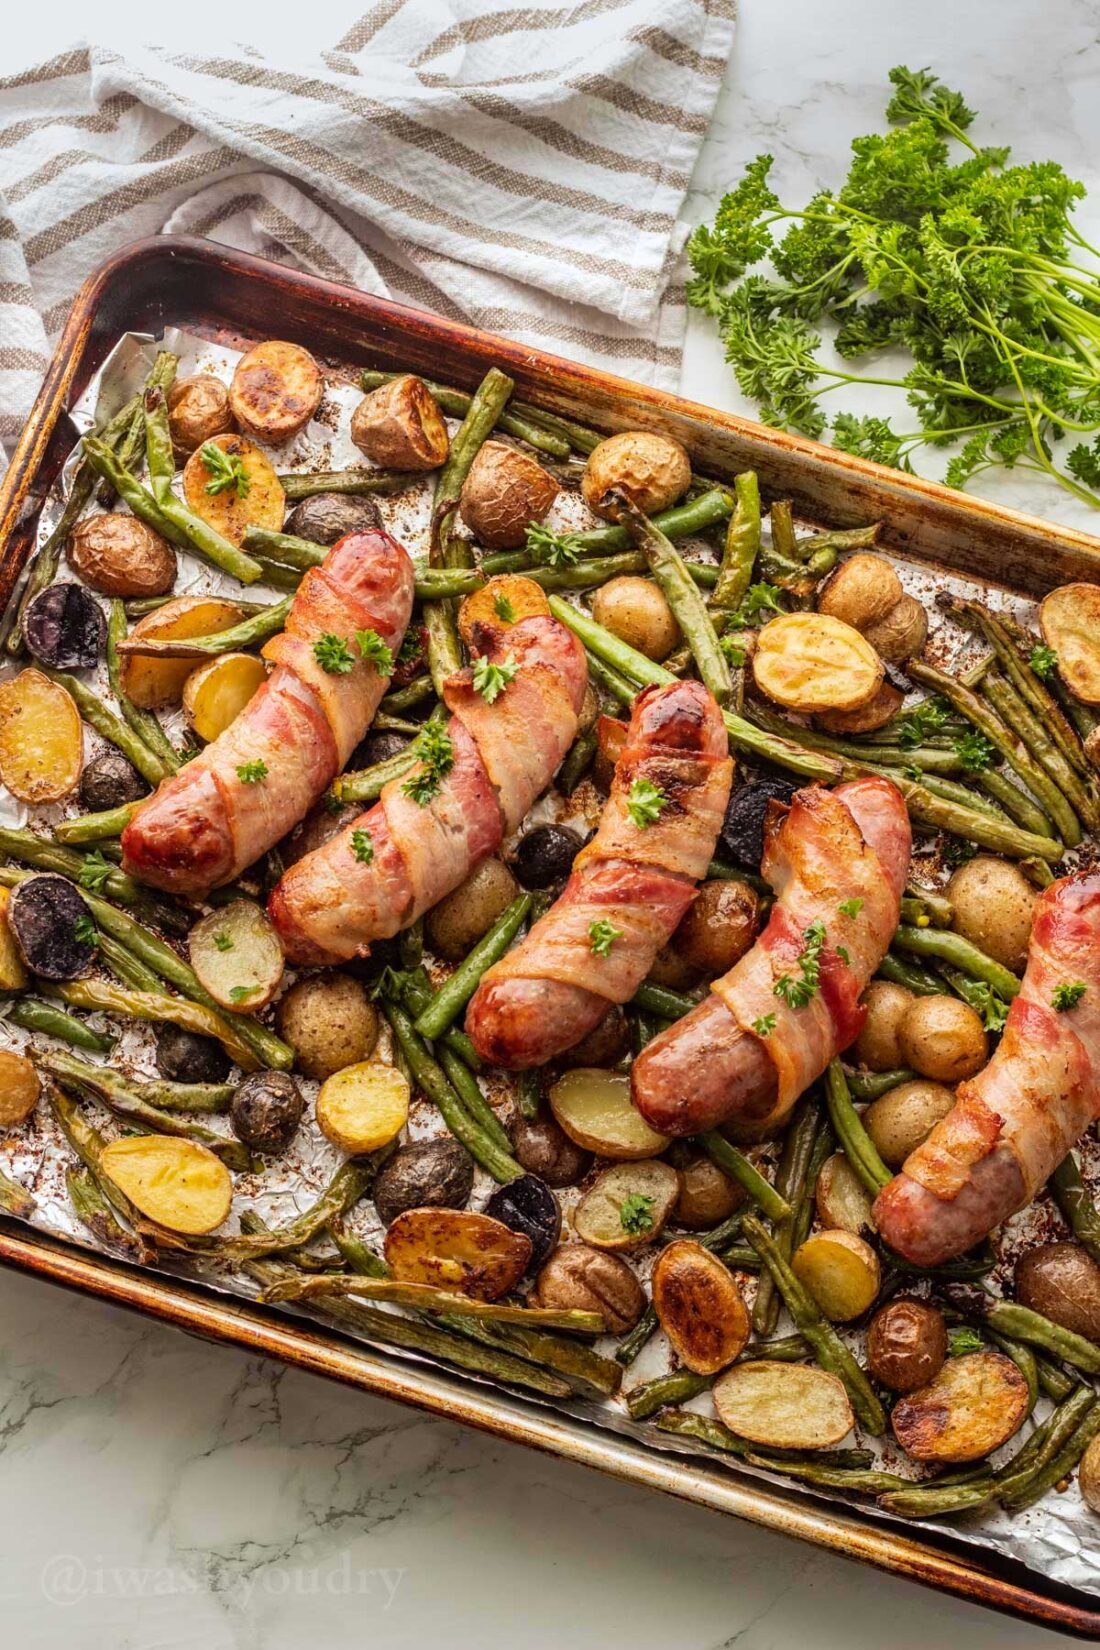 Cooked bacon wrapped bratwurst on roasted vegetables in metal baking pan.